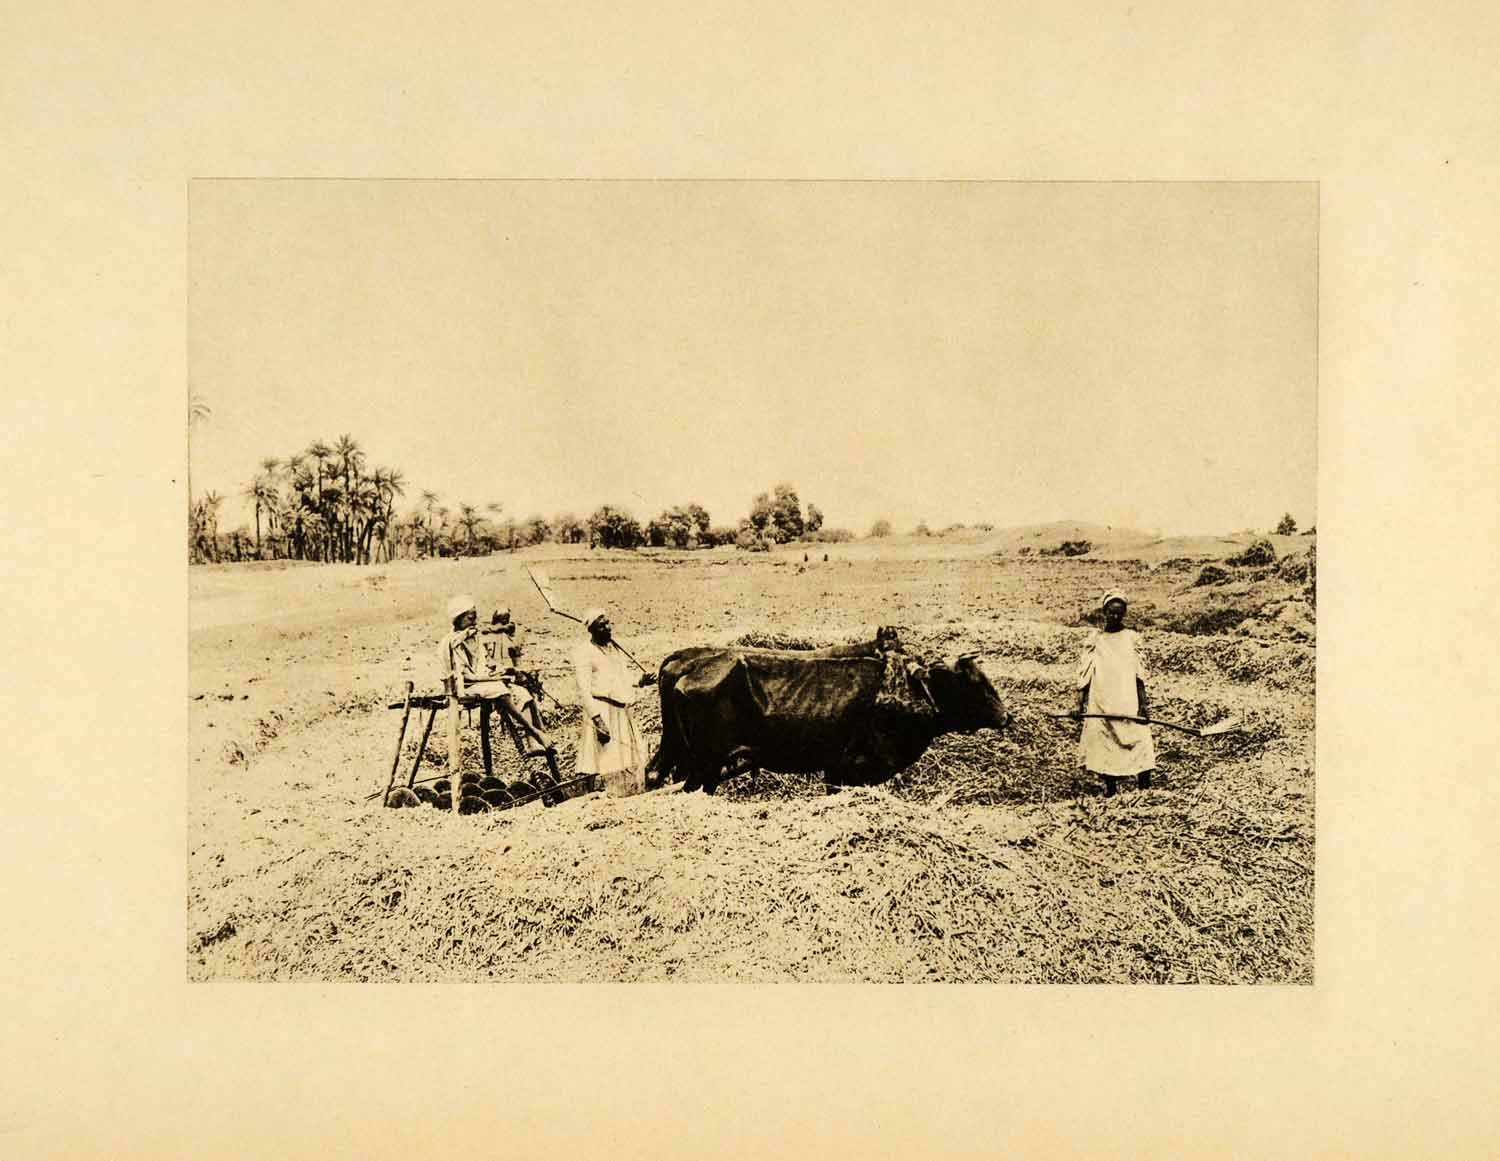 1903 Photogravure Straw Harvest Oxen Middle East Farming Agriculture XHA3